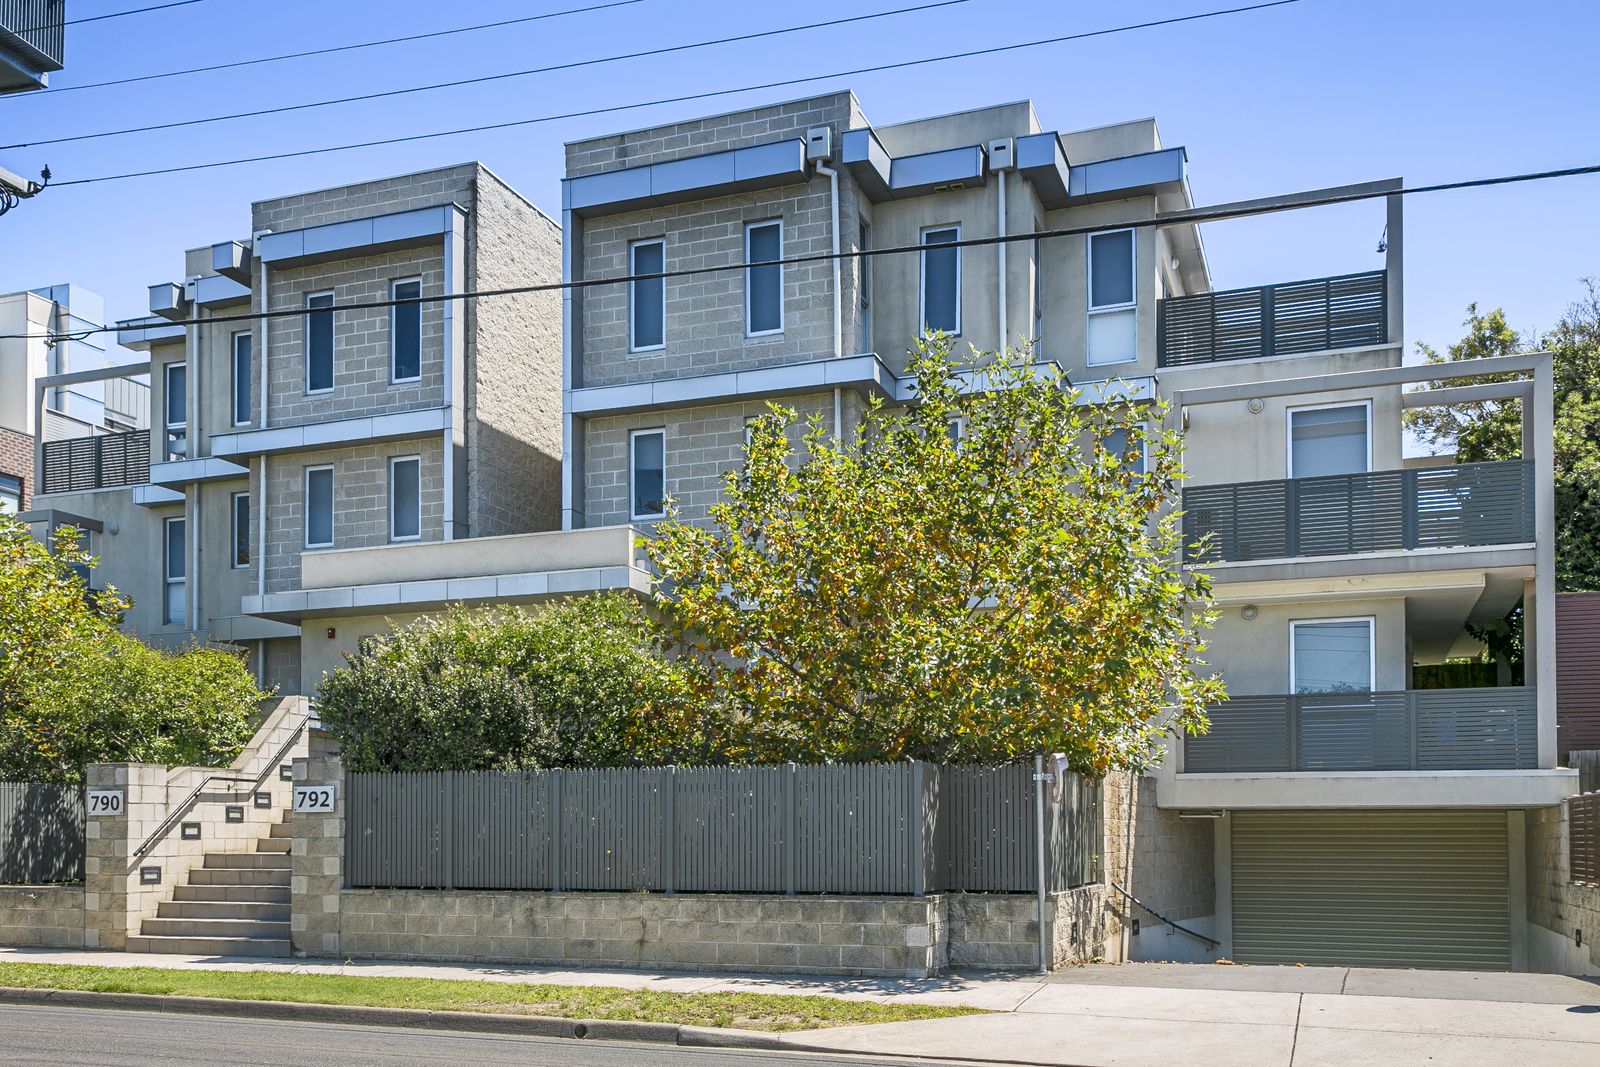 2 bedrooms Apartment / Unit / Flat in 17/790 Warrigal Road MALVERN EAST VIC, 3145